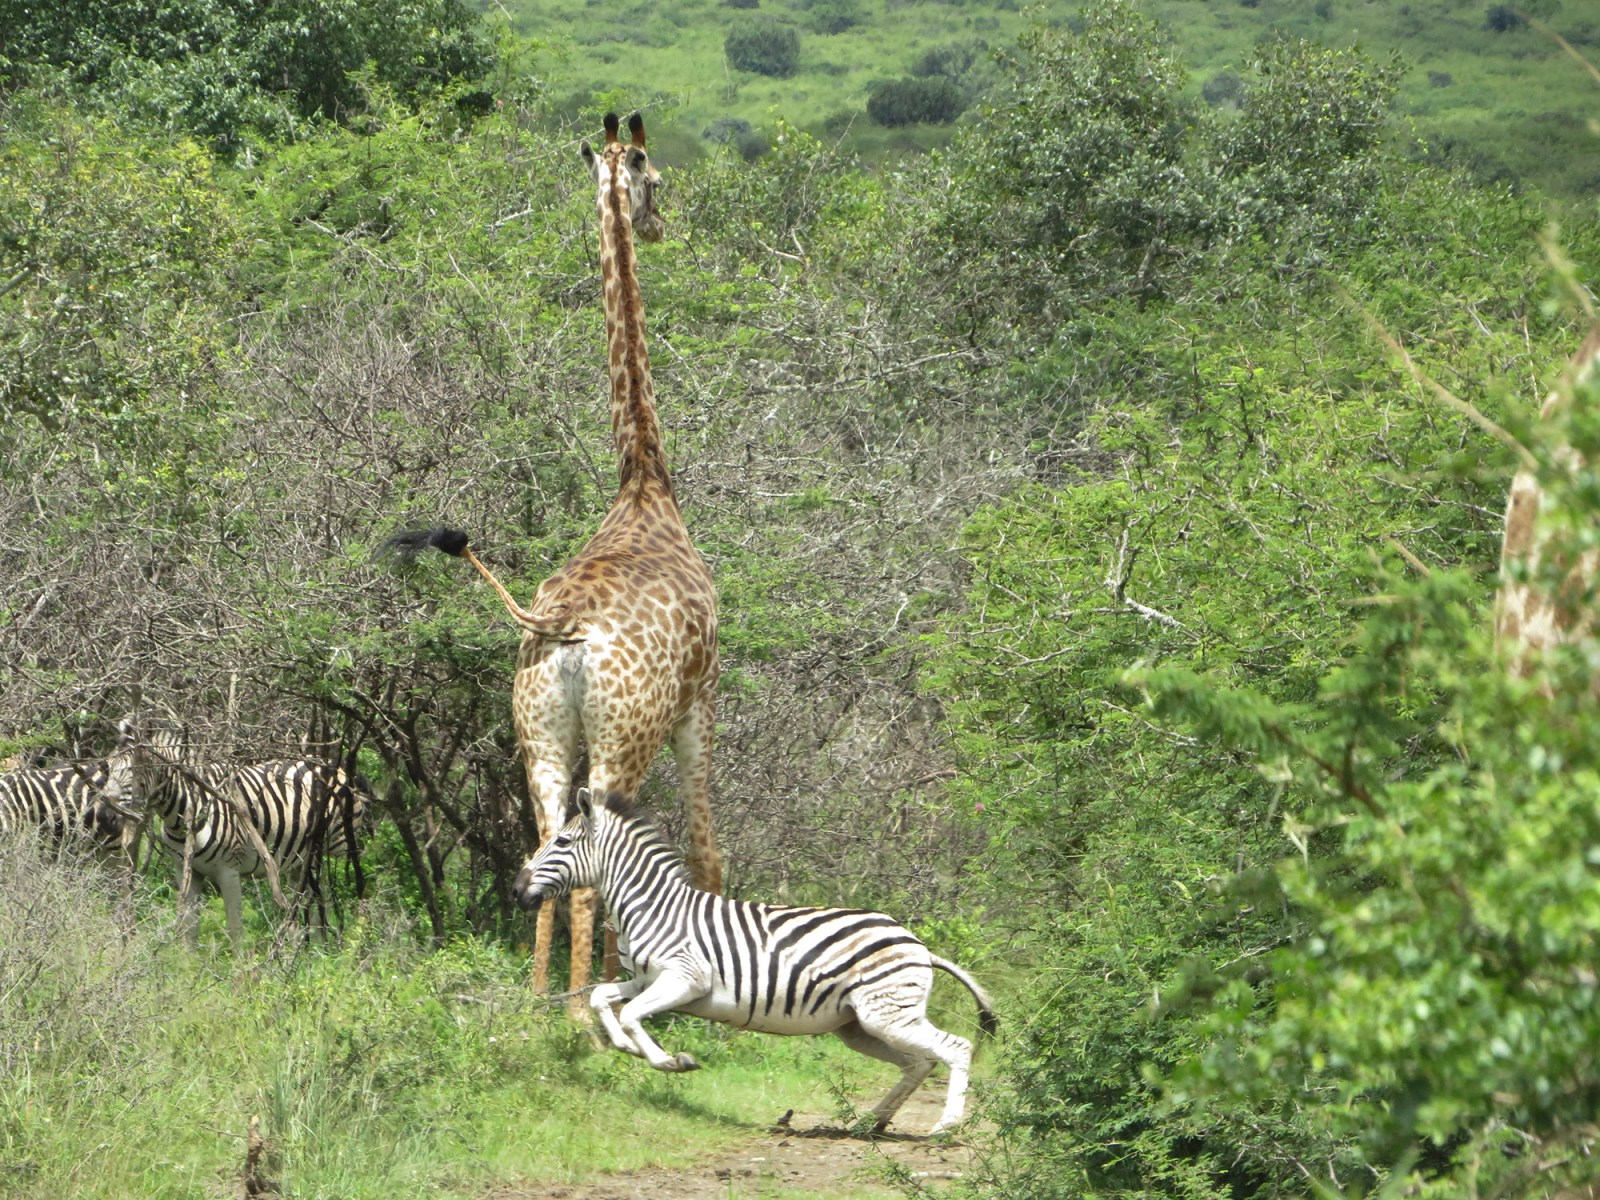 Mawana Game Reserve is rich in wildlife